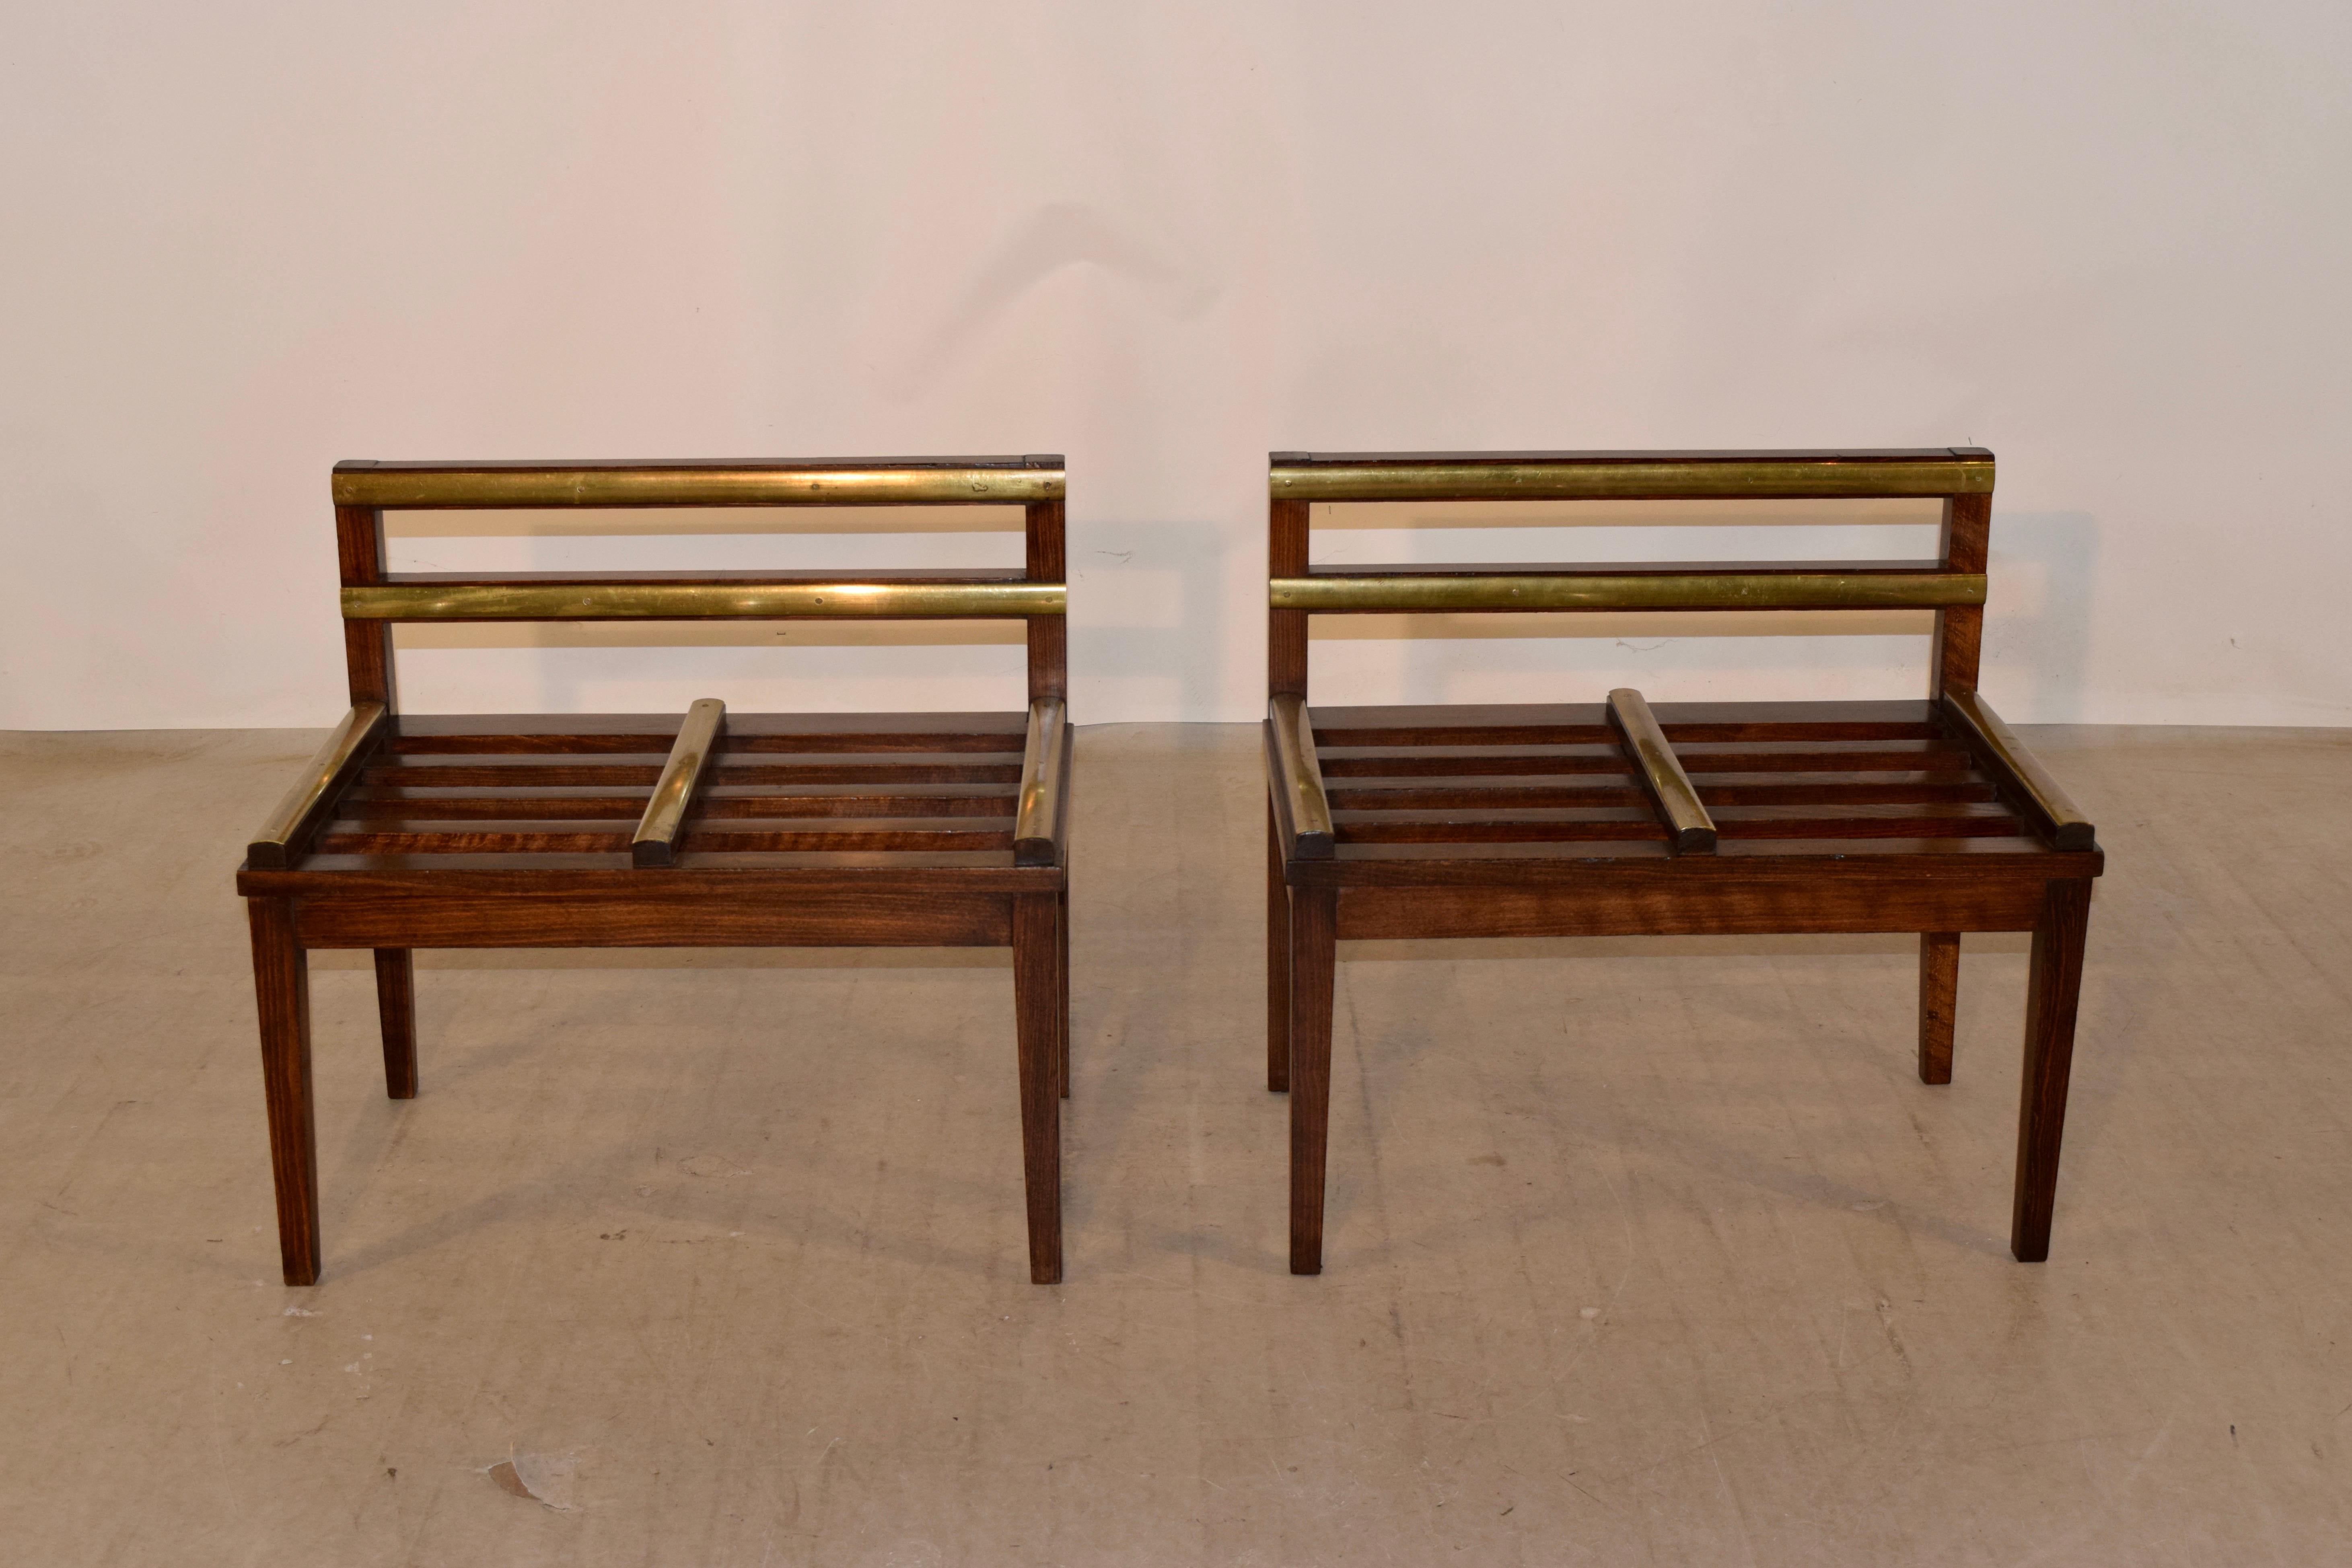 Fabulous and very rare pair of signed RINCK Paris luggage stands made from fruitwood, circa 1920-1940. They are of a simple and elegant design, with brass rails to keep the wood surfaces in clean condition. The Rinck family were cabinetmakers, and